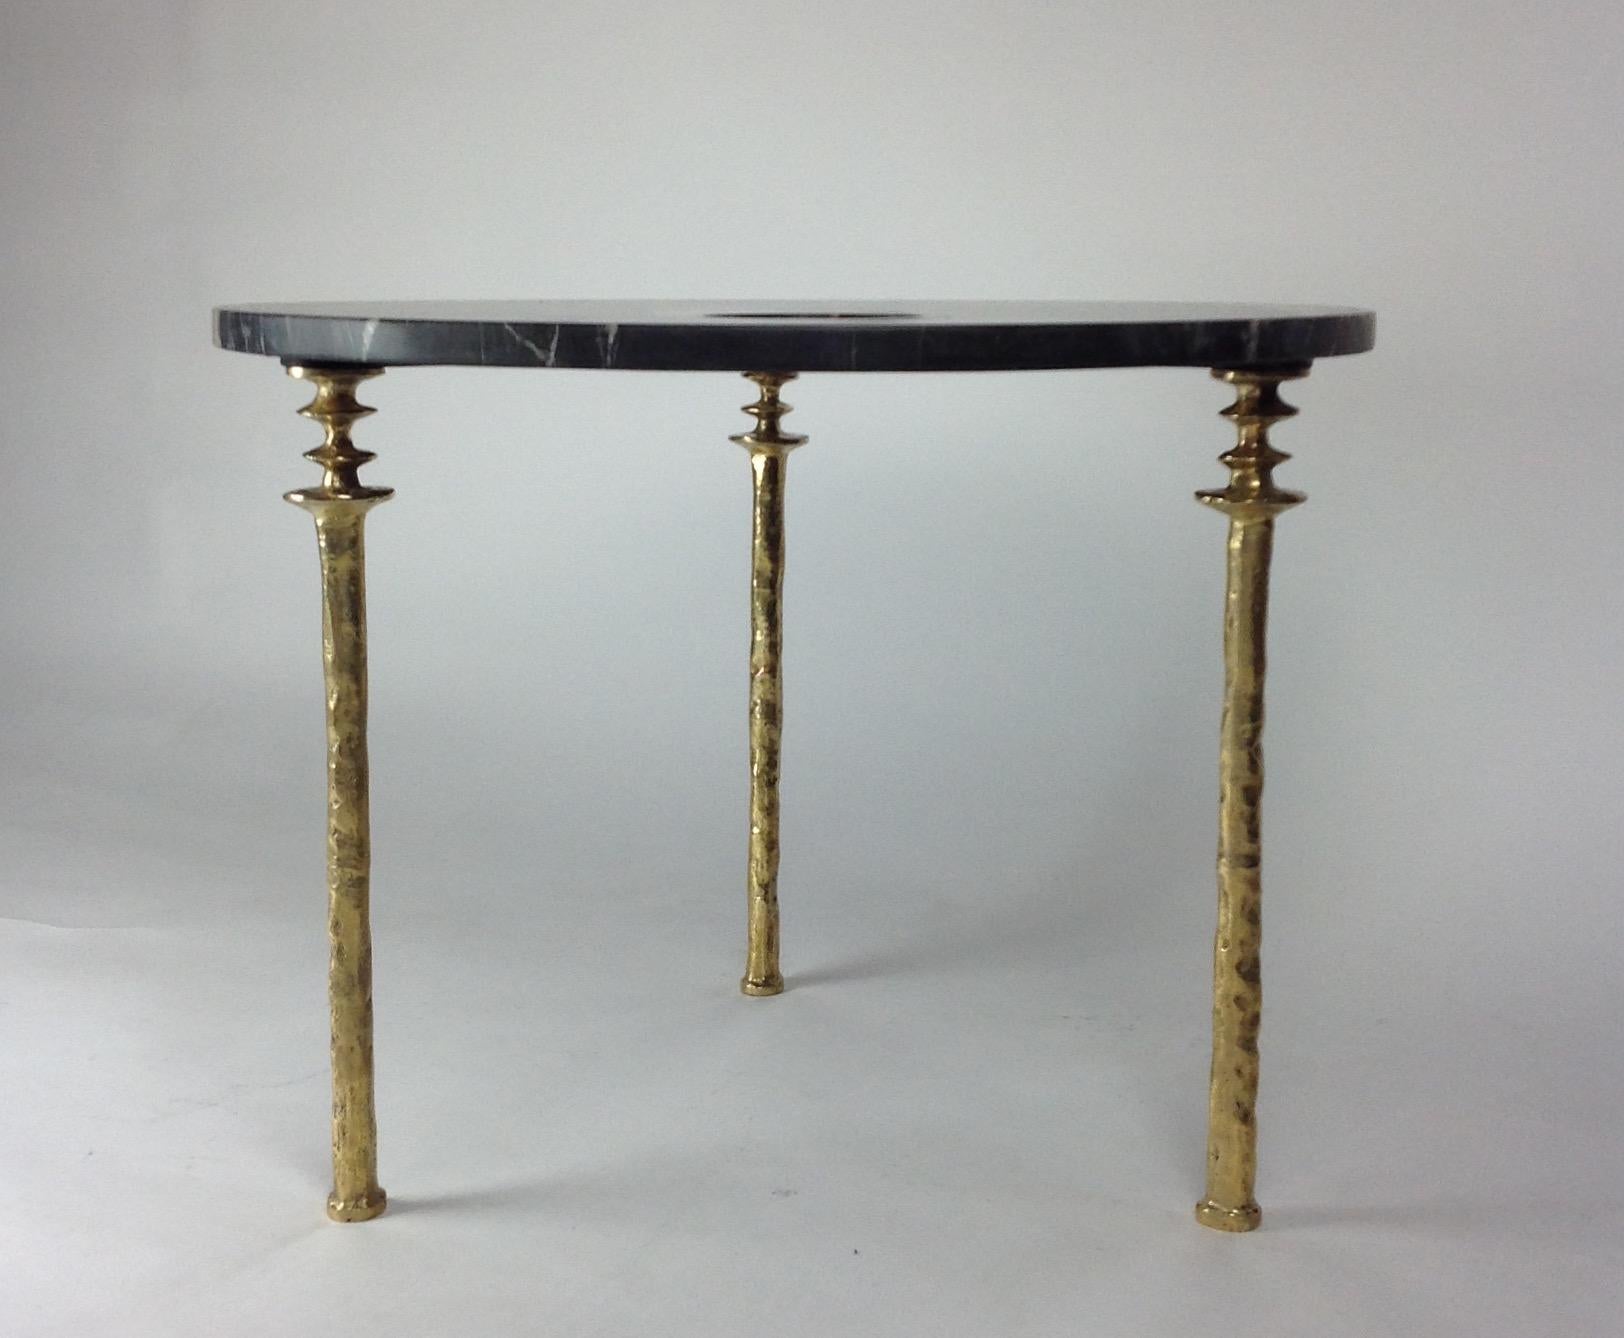 Organic Modern Sorgue Side Table, Black Marble with Brass Legs, by Bourgeois Boheme Atelier